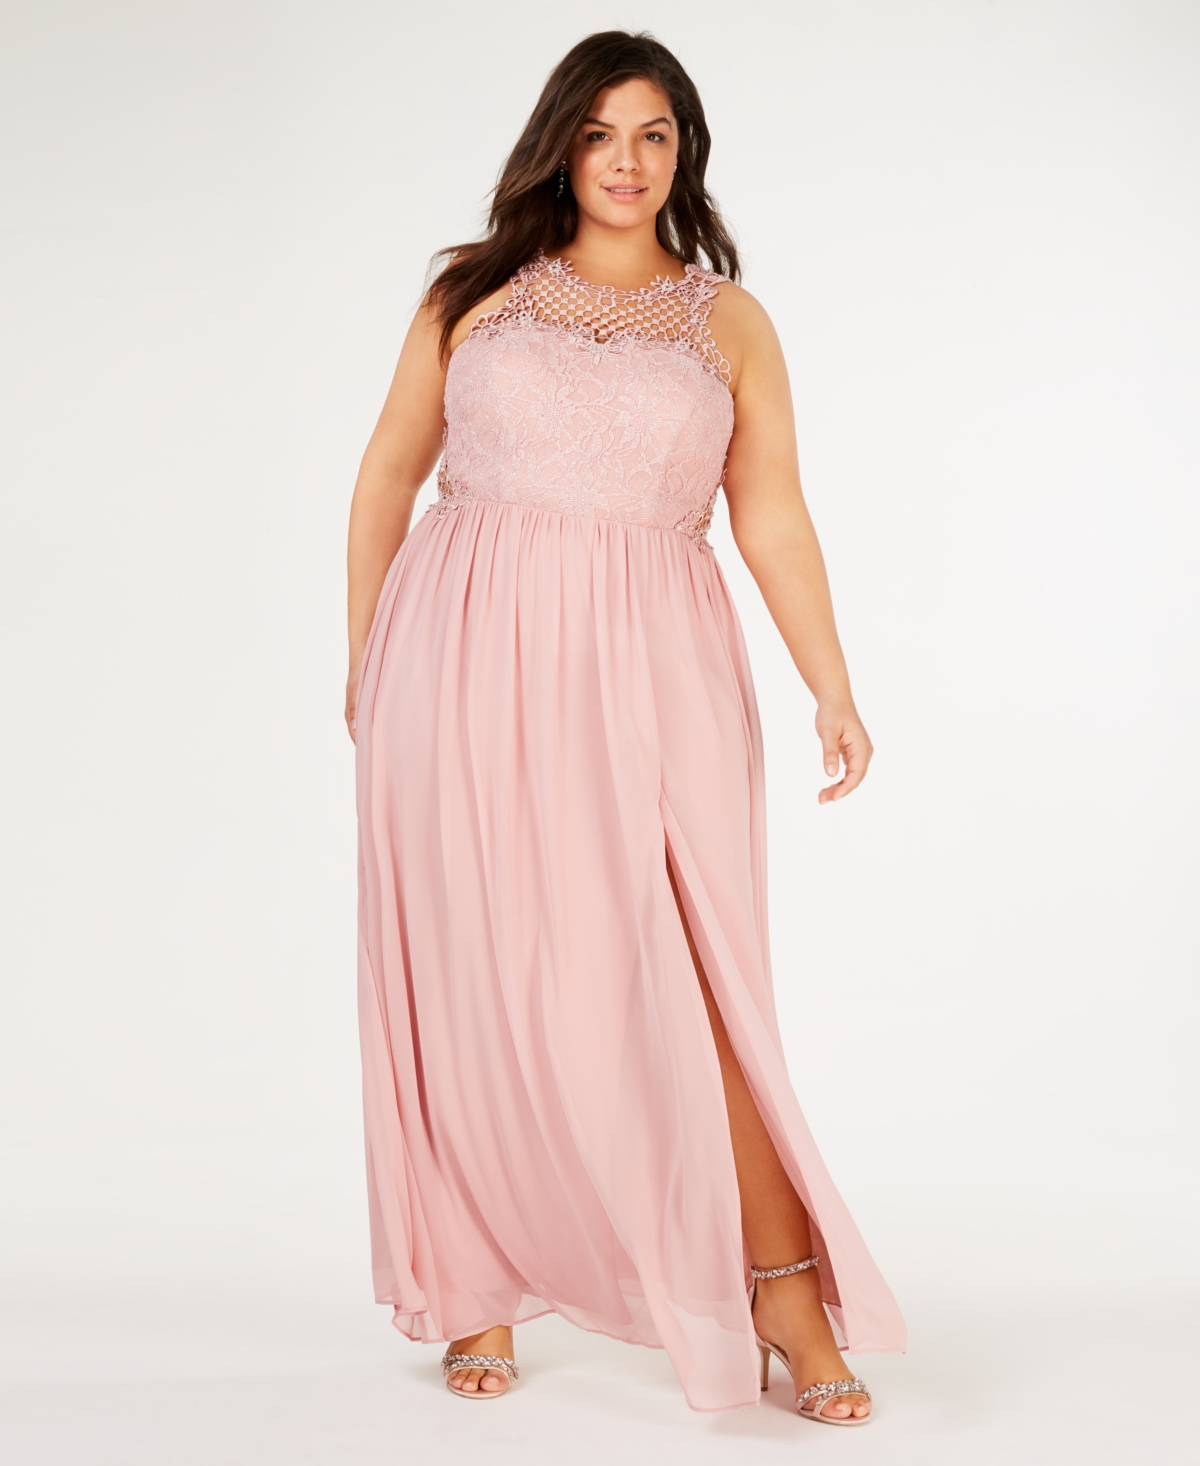 City Studios Trendy Plus Size Embellished Illusion Tulip Gown